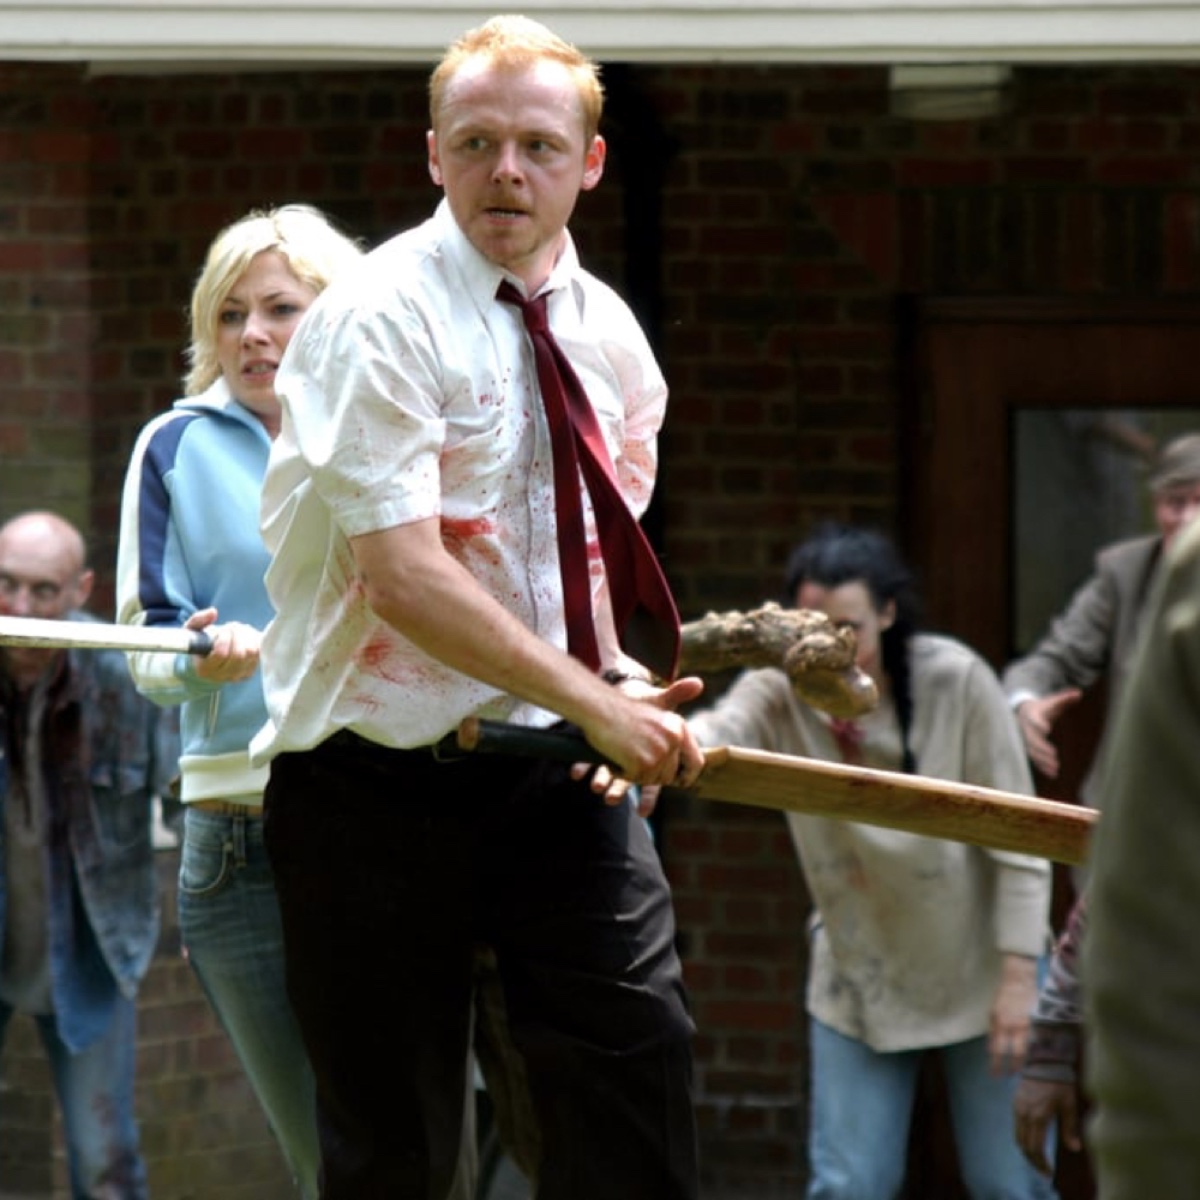 Shaun of the Dead Costume - Shaun of the Dead Fancy Dress - Shaun and Ed Cosplay - Shaun Fake Blood